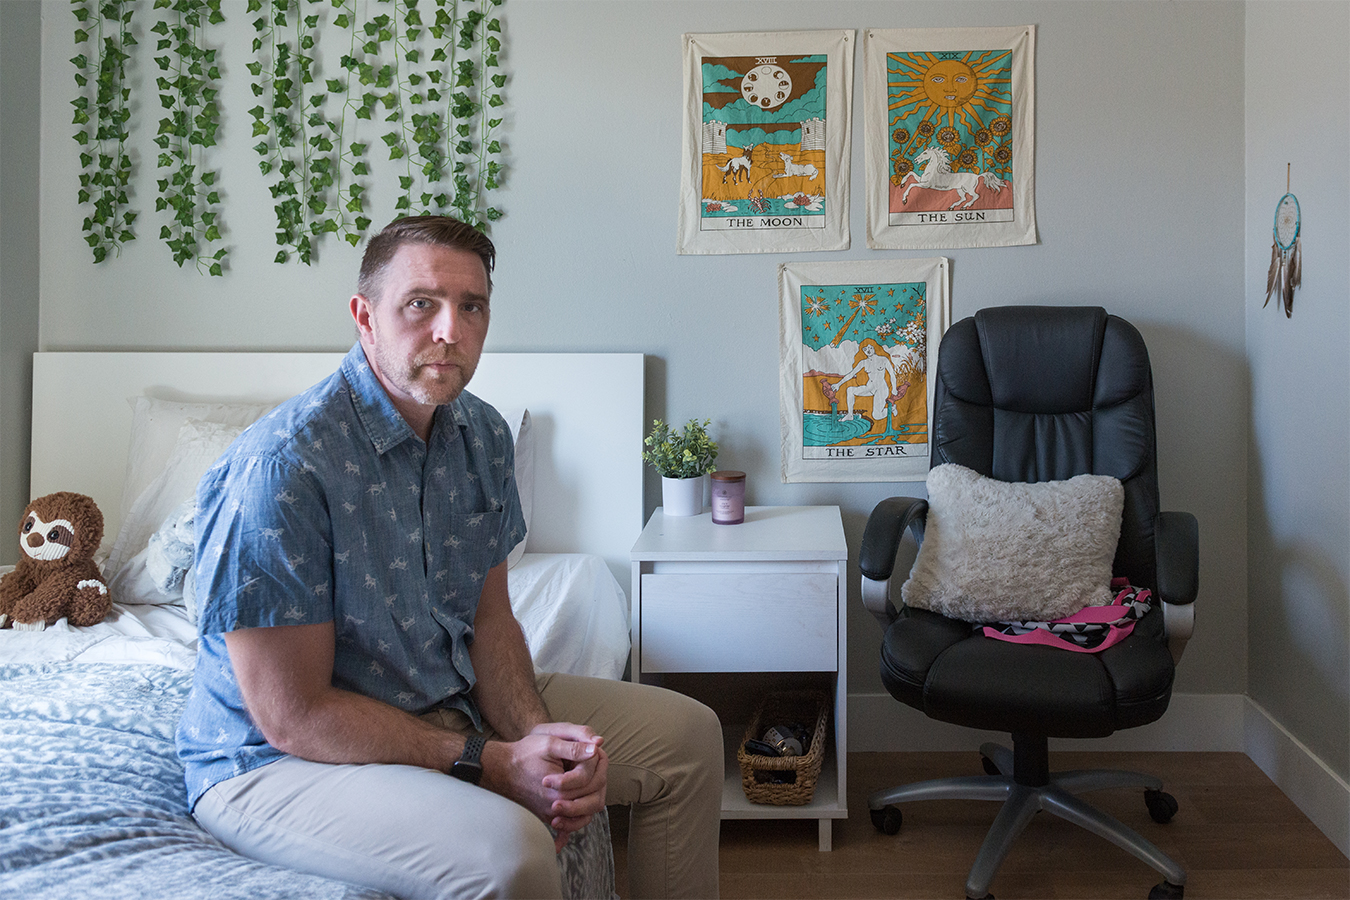 Lee Stonum is seen on the left, sitting in his daughter's bed. A plush sloth sits to his right. Canvas prints and ivy hang on the walls behind him. The room is brightly lit and the walls and furniture are white.